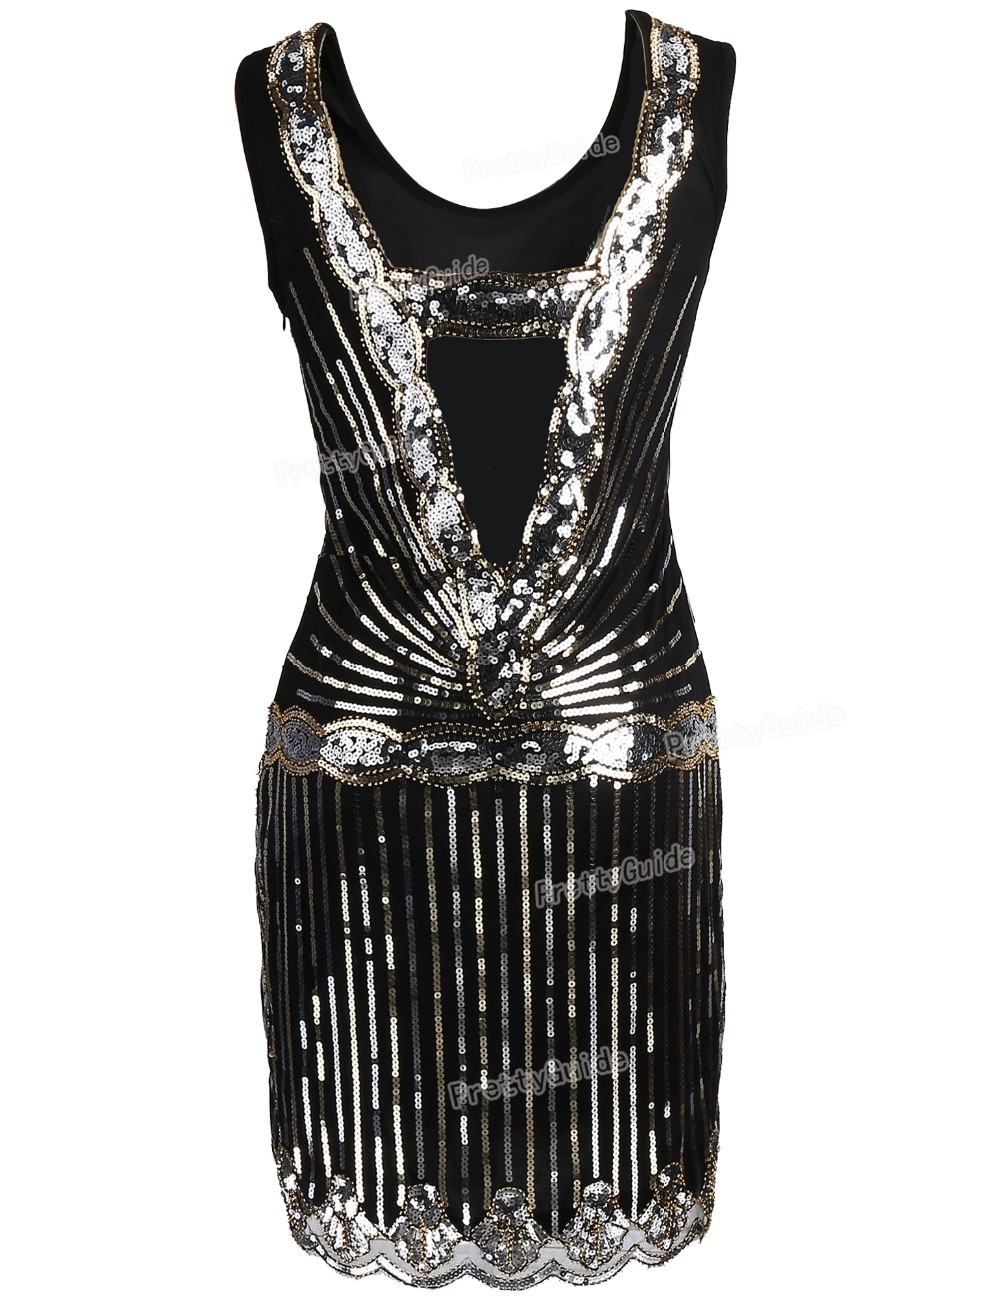 PrettyGuide-Women-1920s-Vintage-Art-Deco-Sequin-Inspired-Great-Gatsby-Flapper-Cocktail-Party-Dress-32634772225